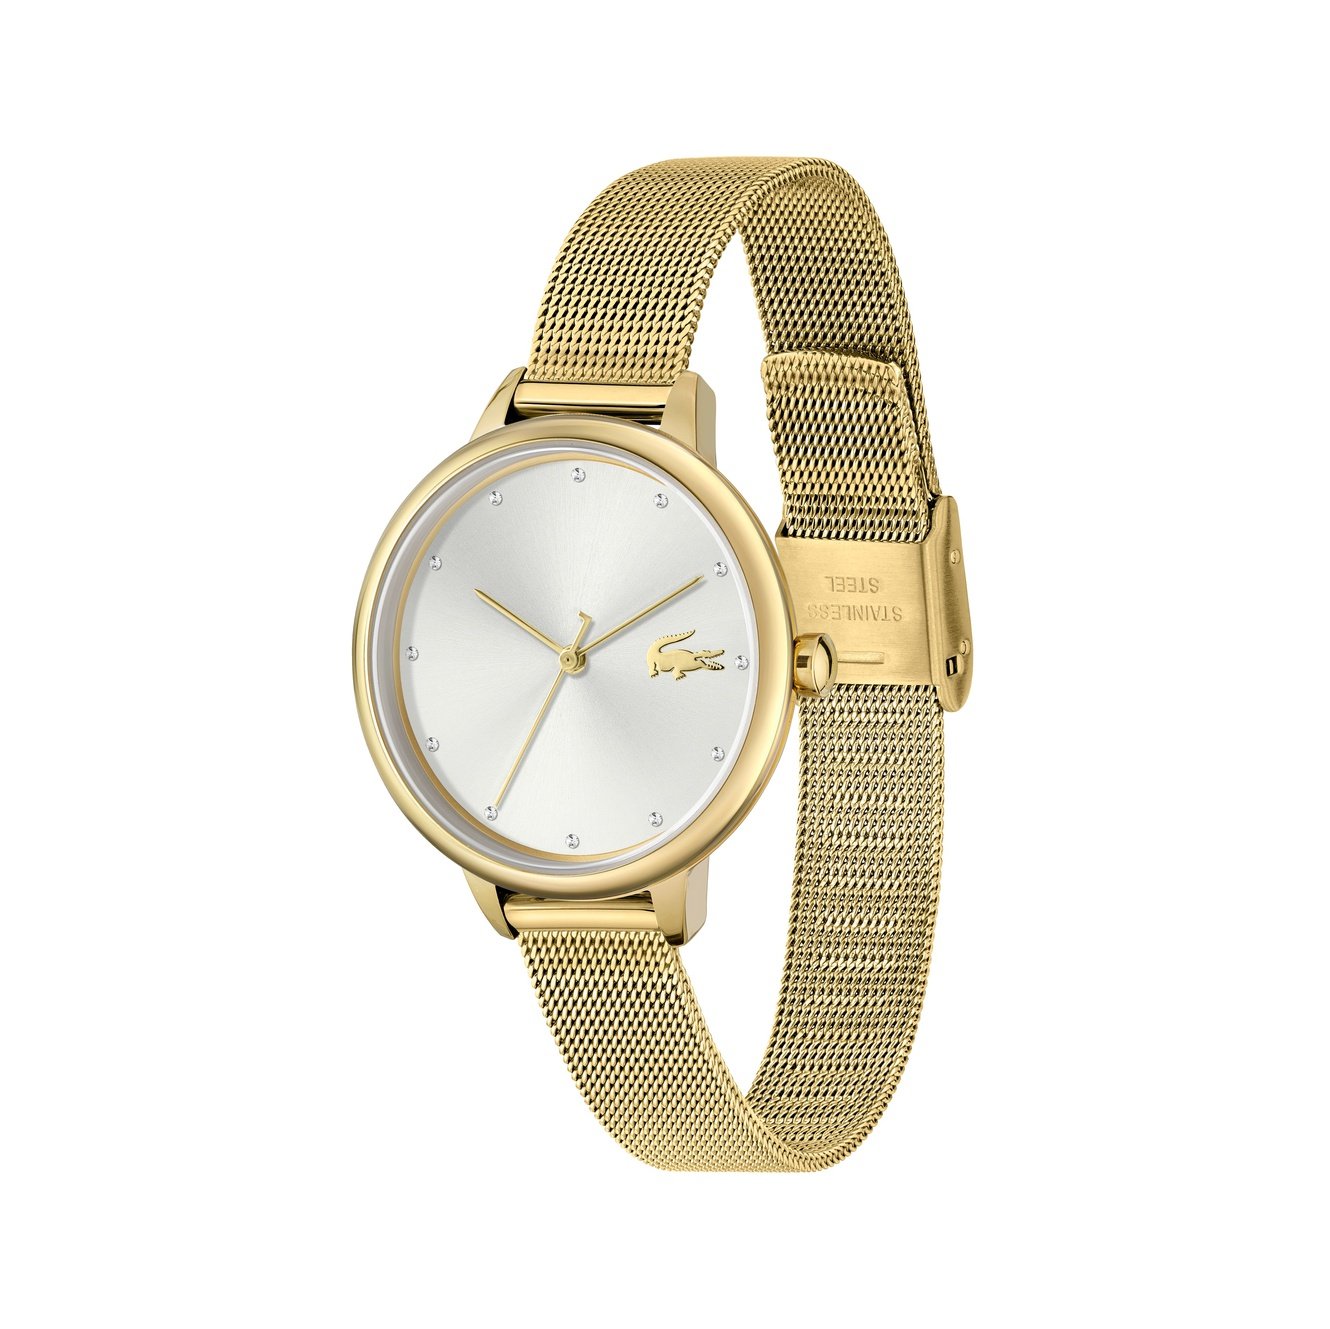 Ladies Cannes Watch 2001254 Lacoste